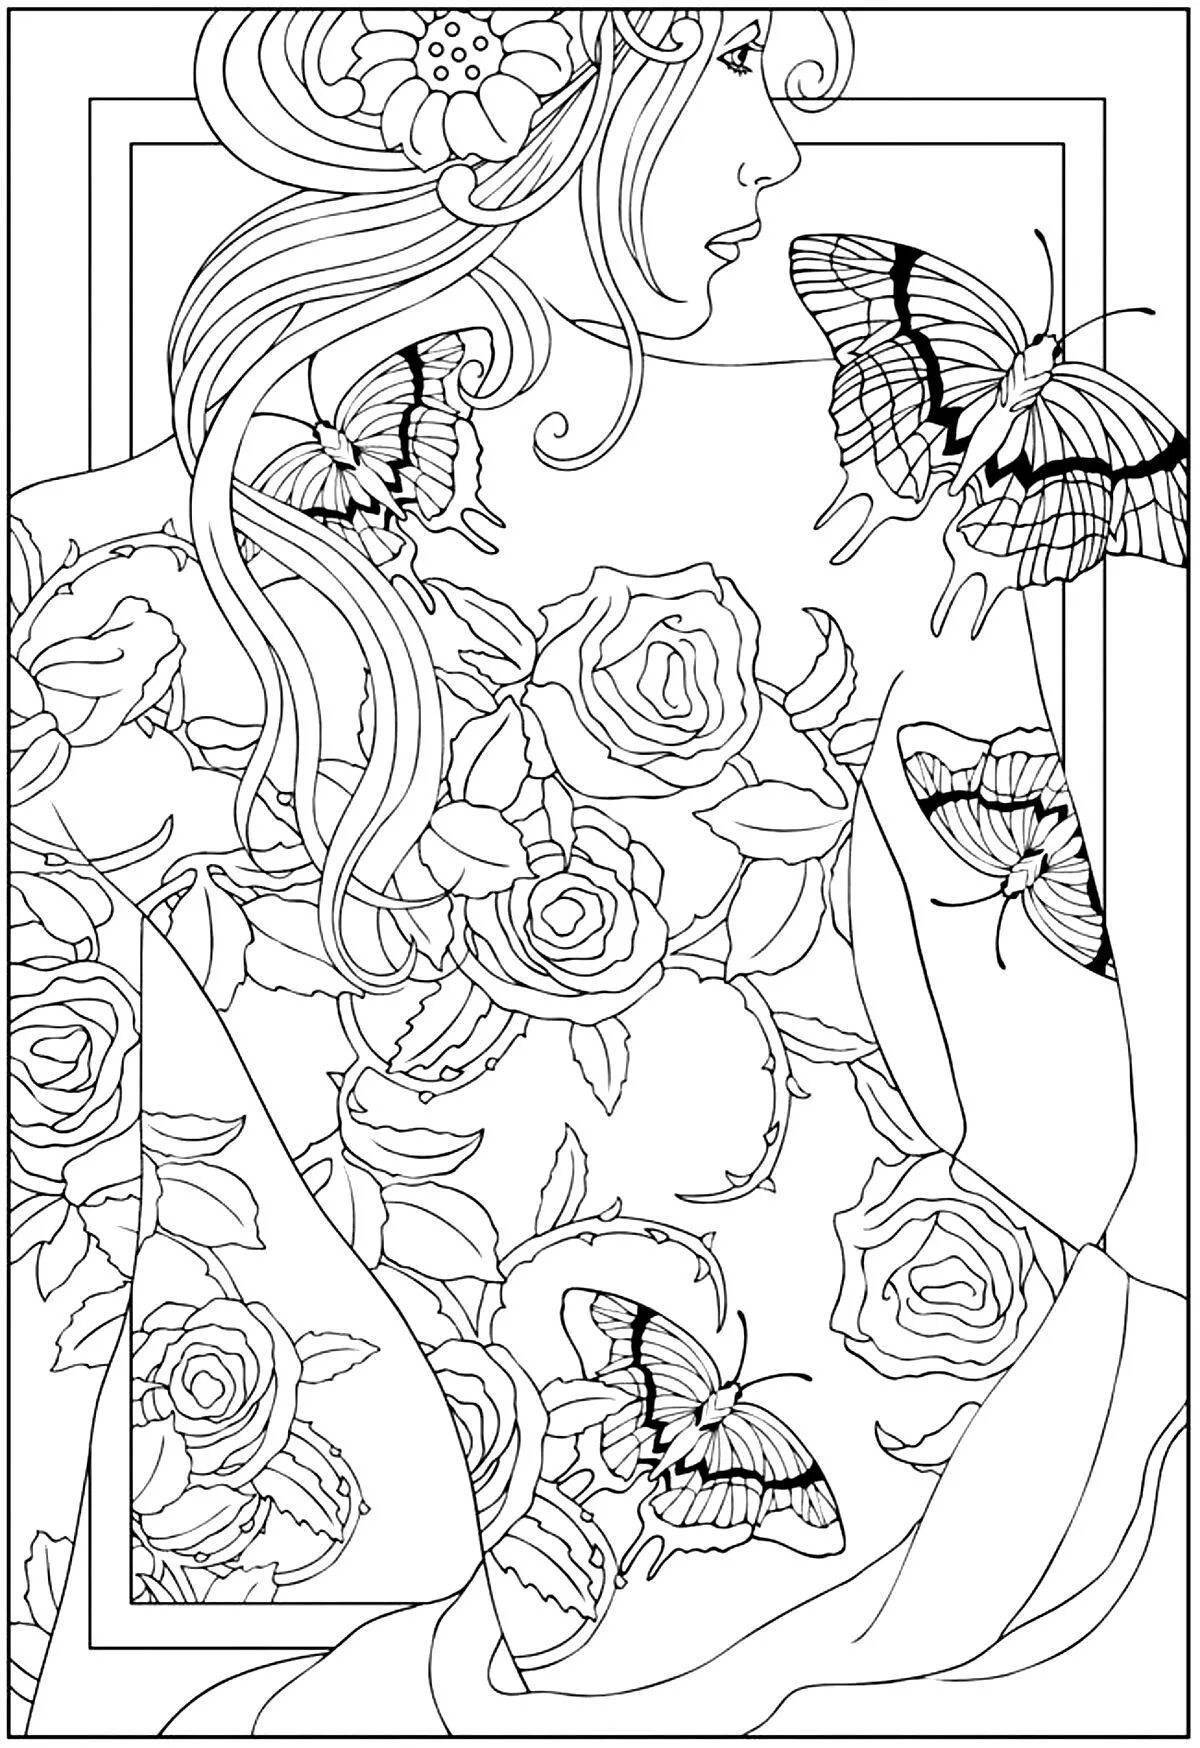 Luxury coloring pages for adults